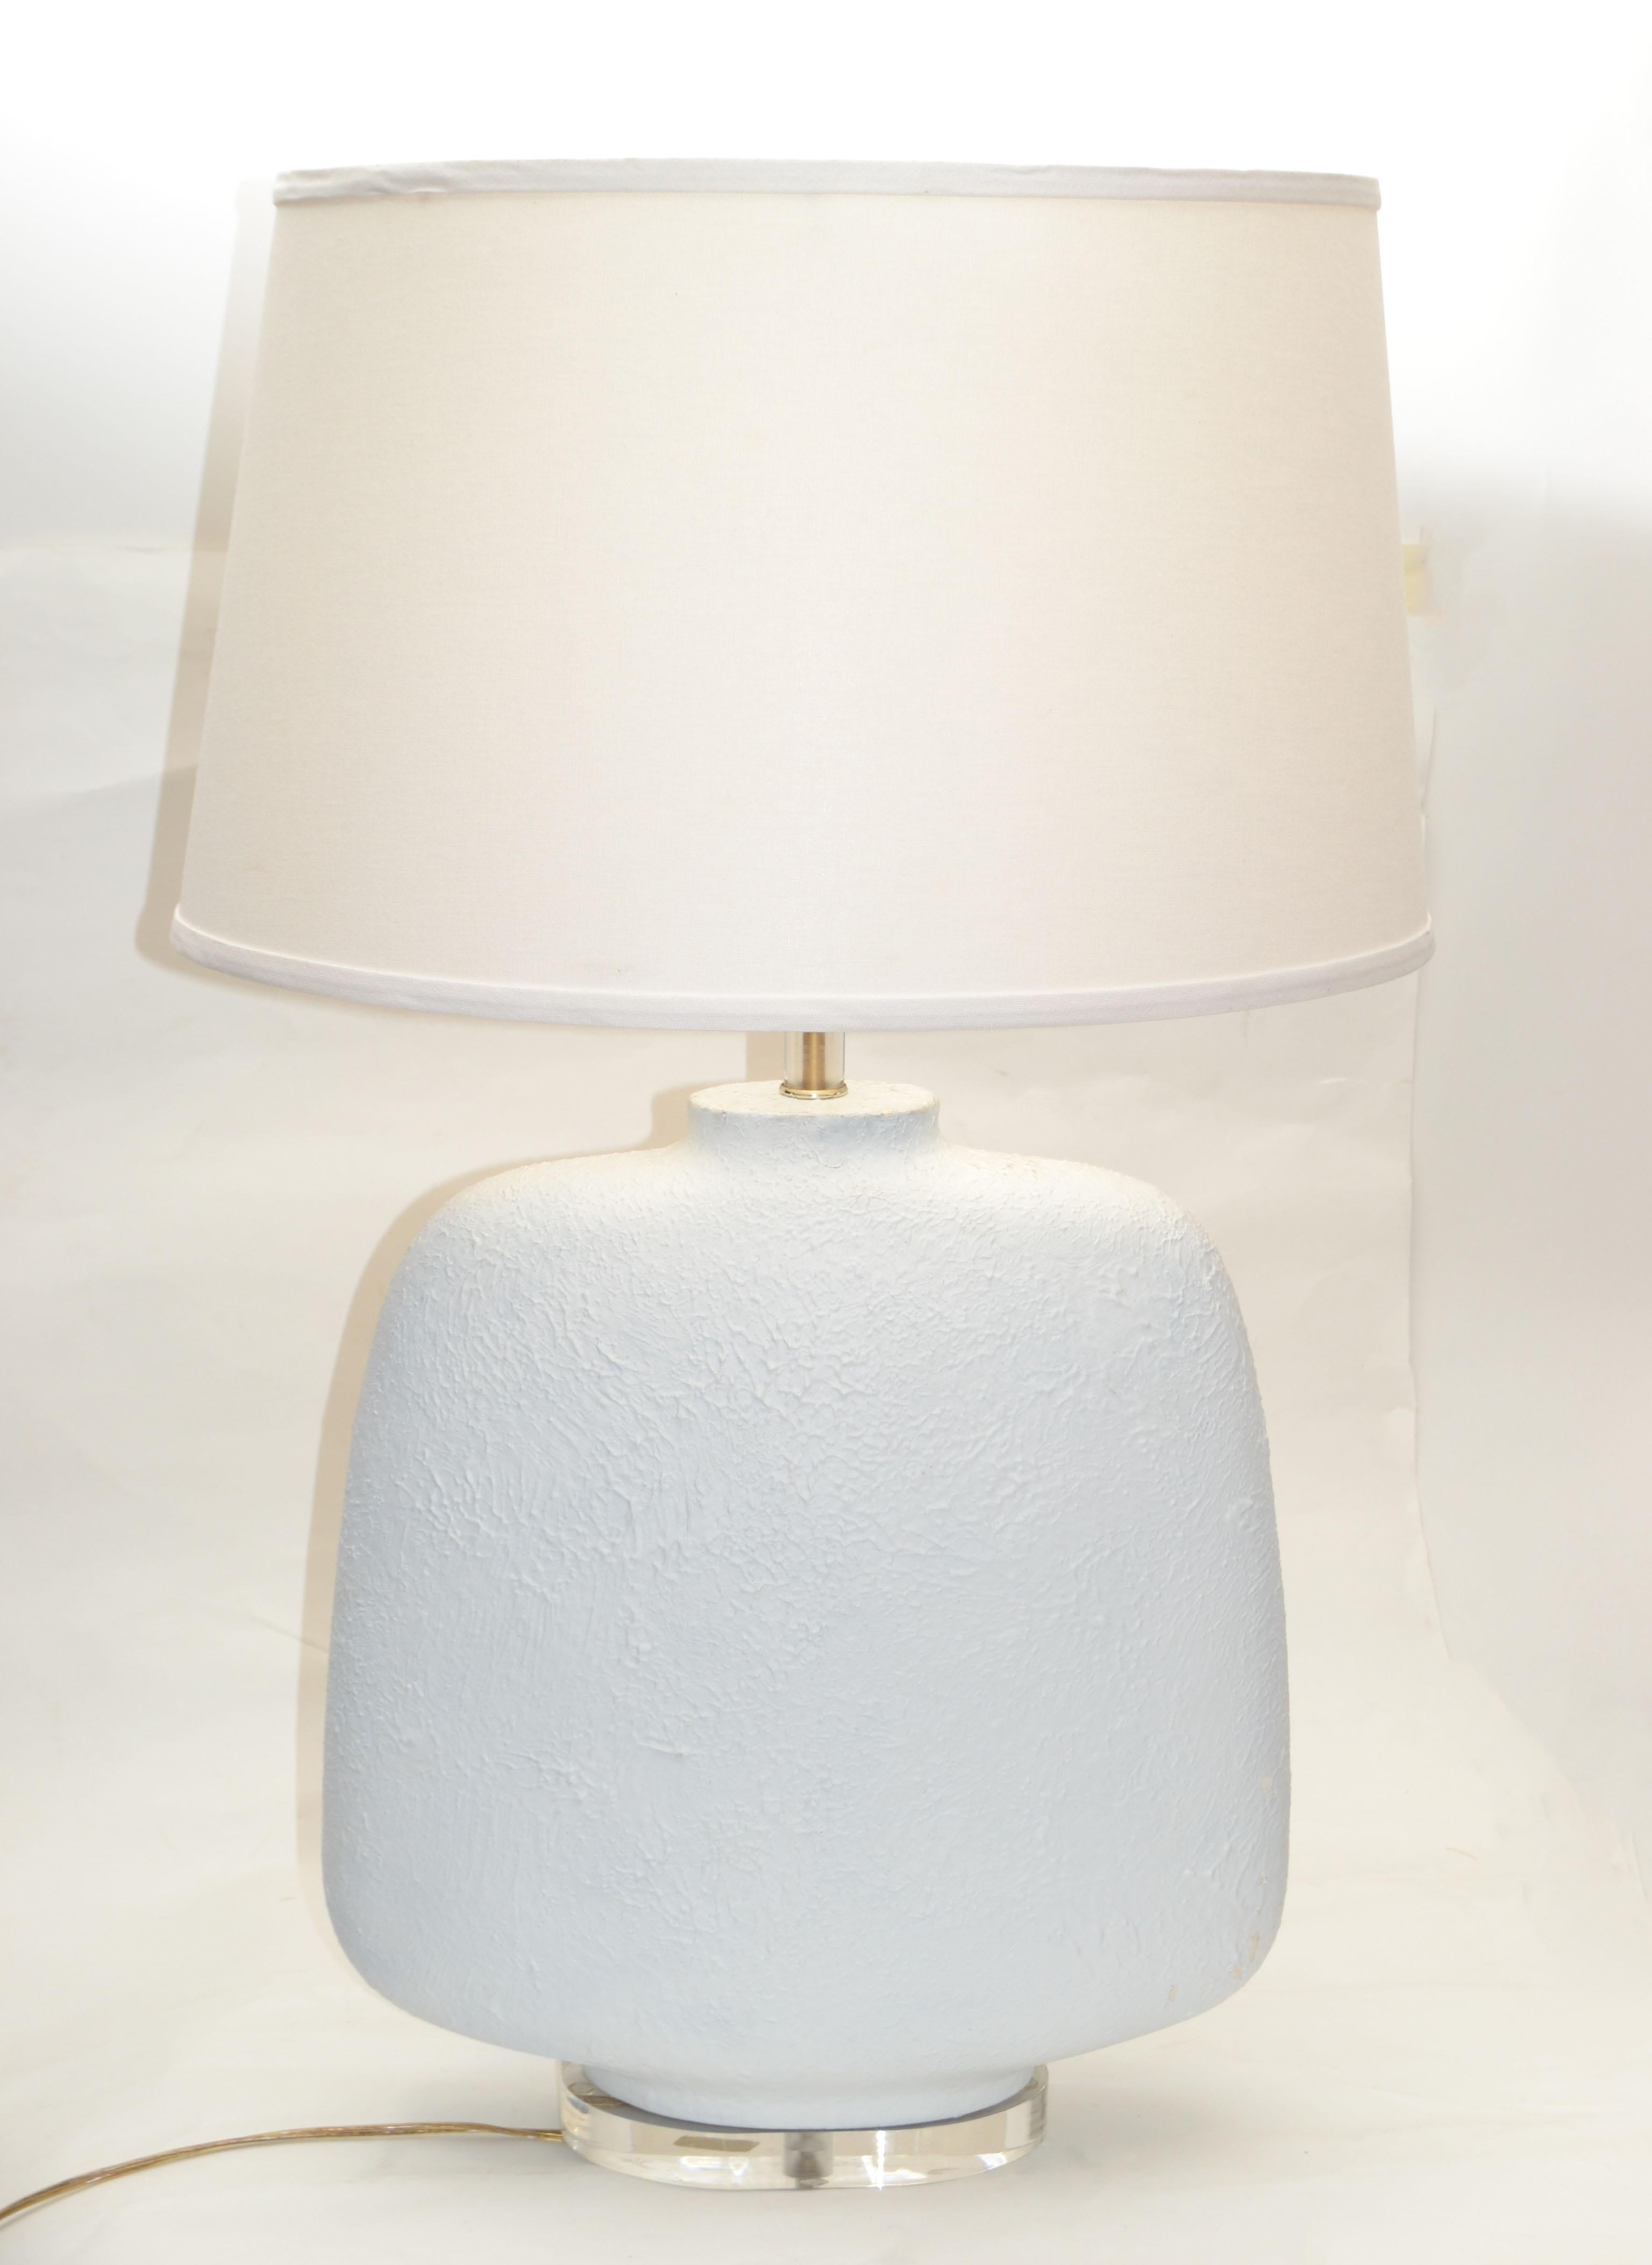 Mid-Century Modern table lamp with Harp & Finial. 
Plaster undertone with textured finish in a slim oval body & a chrome neck.
Lamp is supported by an oval 1-inch-thick Lucite Base.
US Rewired and takes a regular or LED Light Bulb.
Note: NO